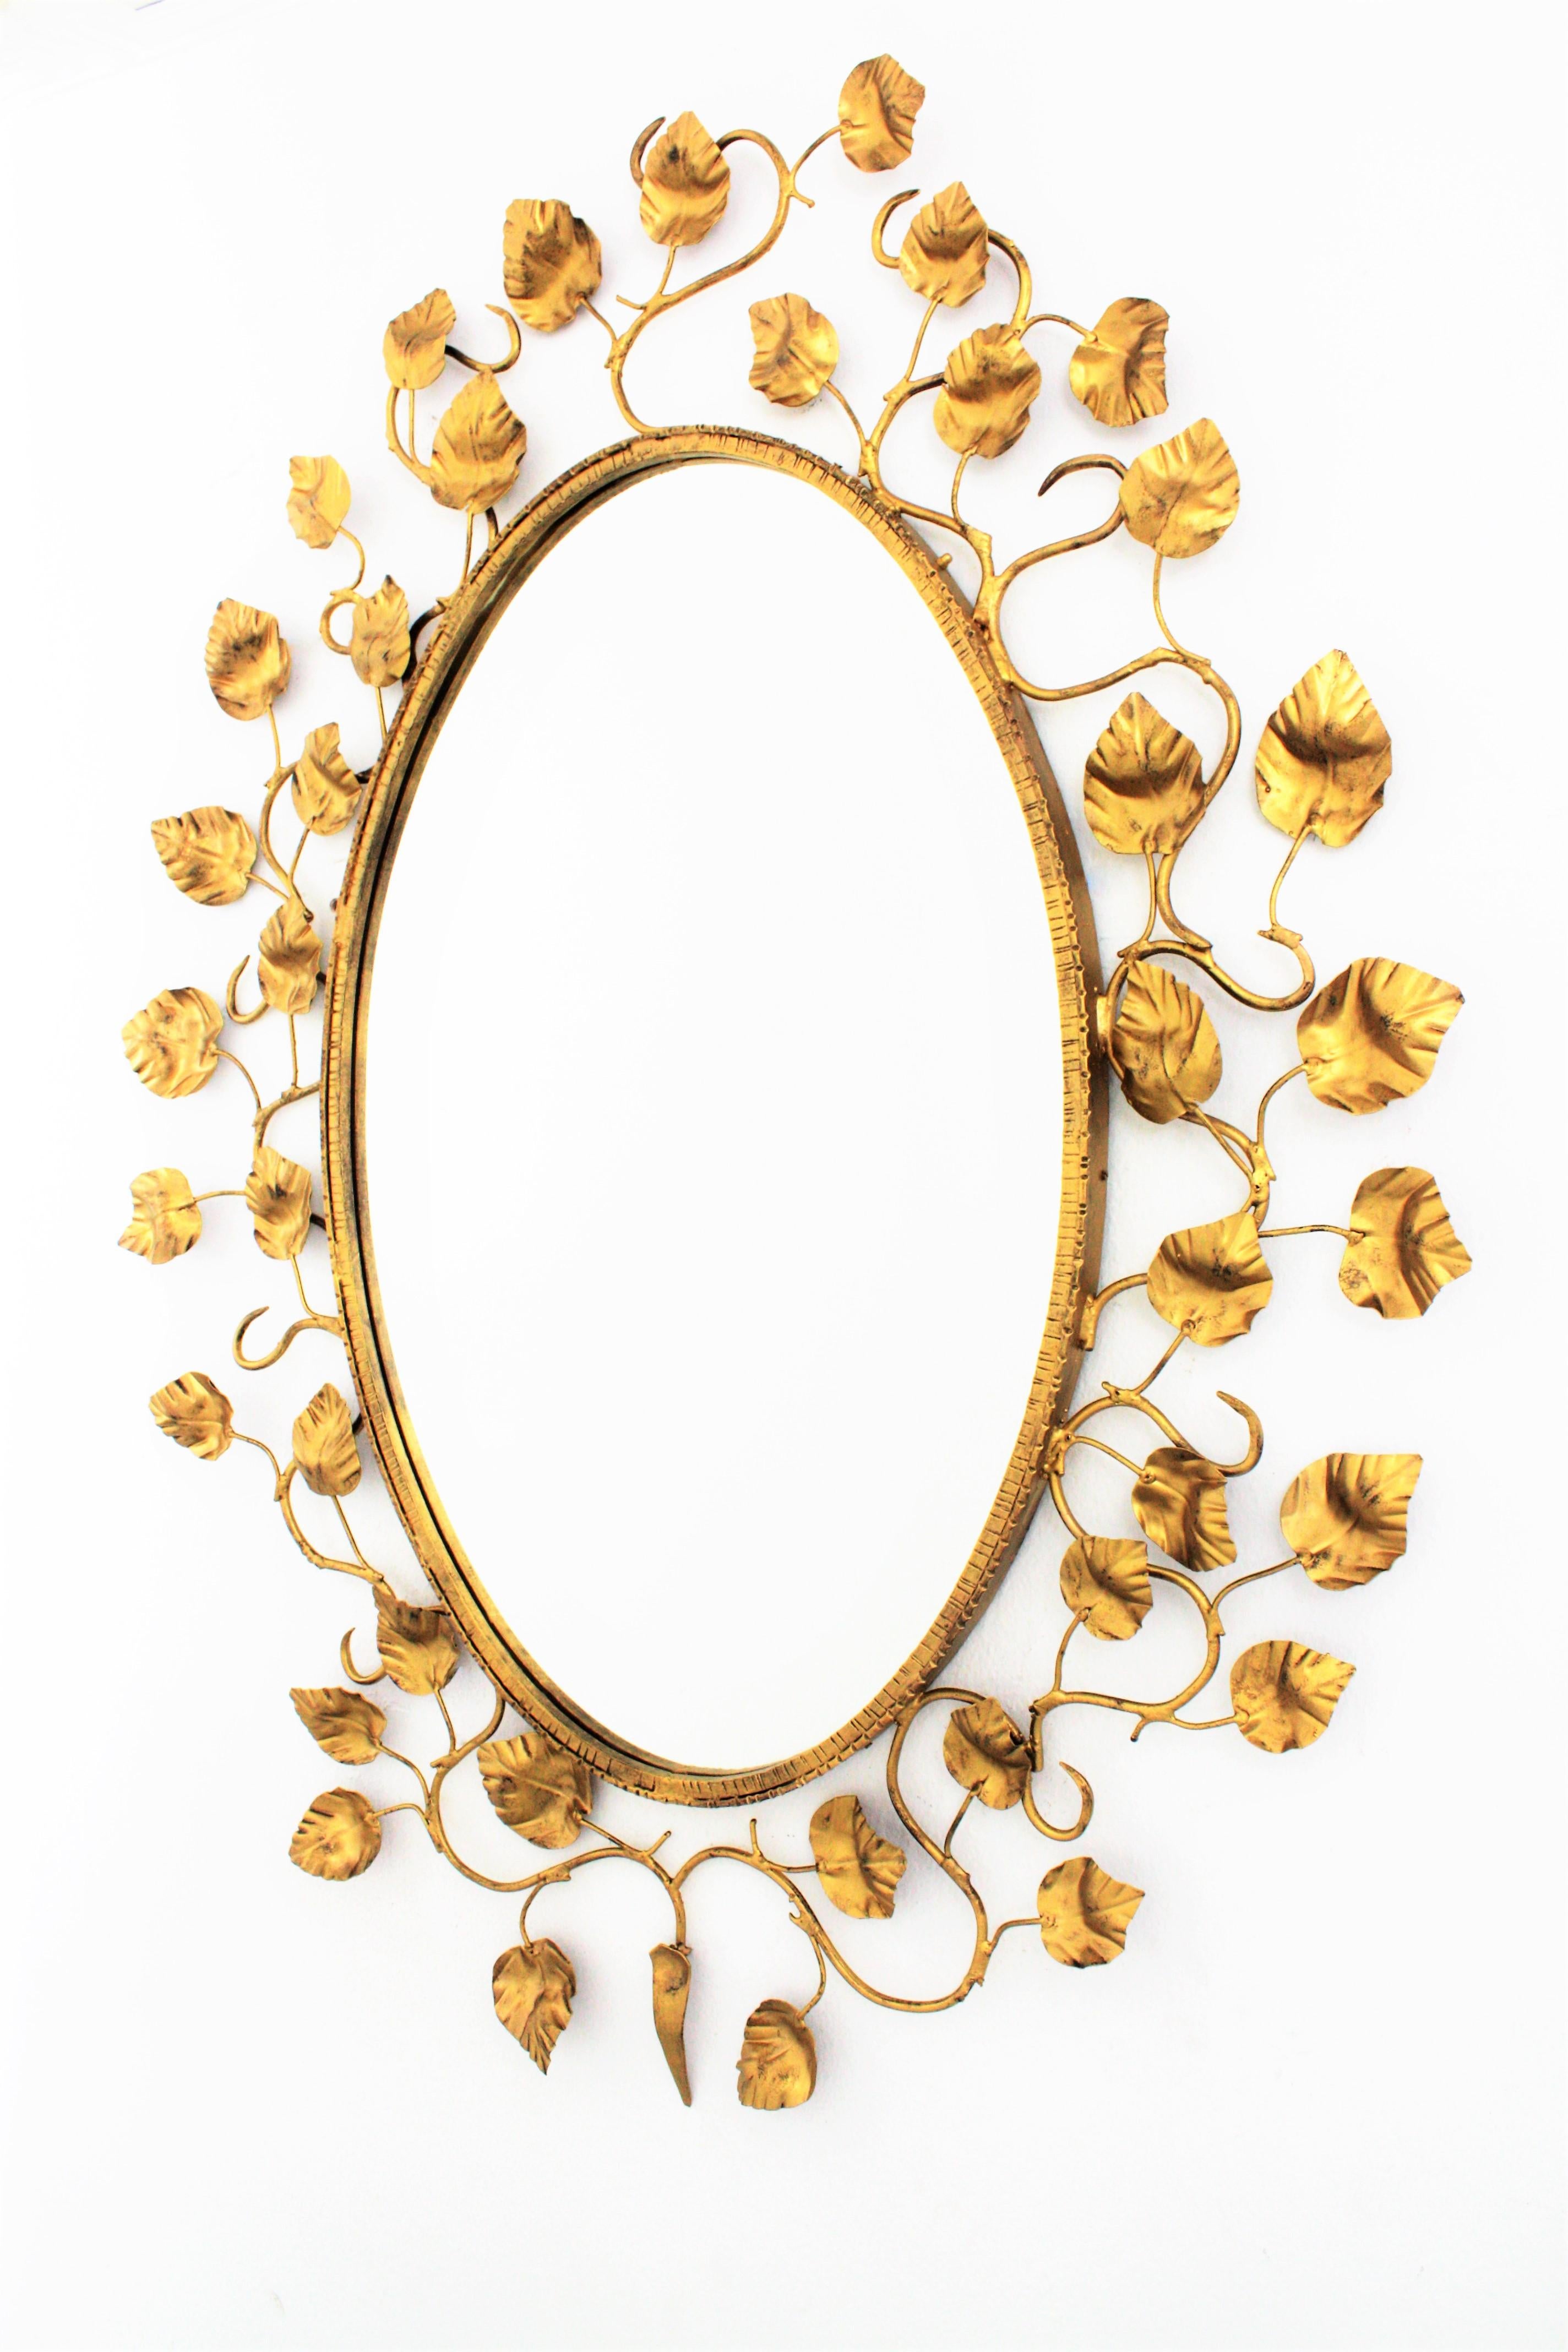 20th Century Spanish Large Oval Mirror in Gilt Iron Foliage Frame, 1950s For Sale